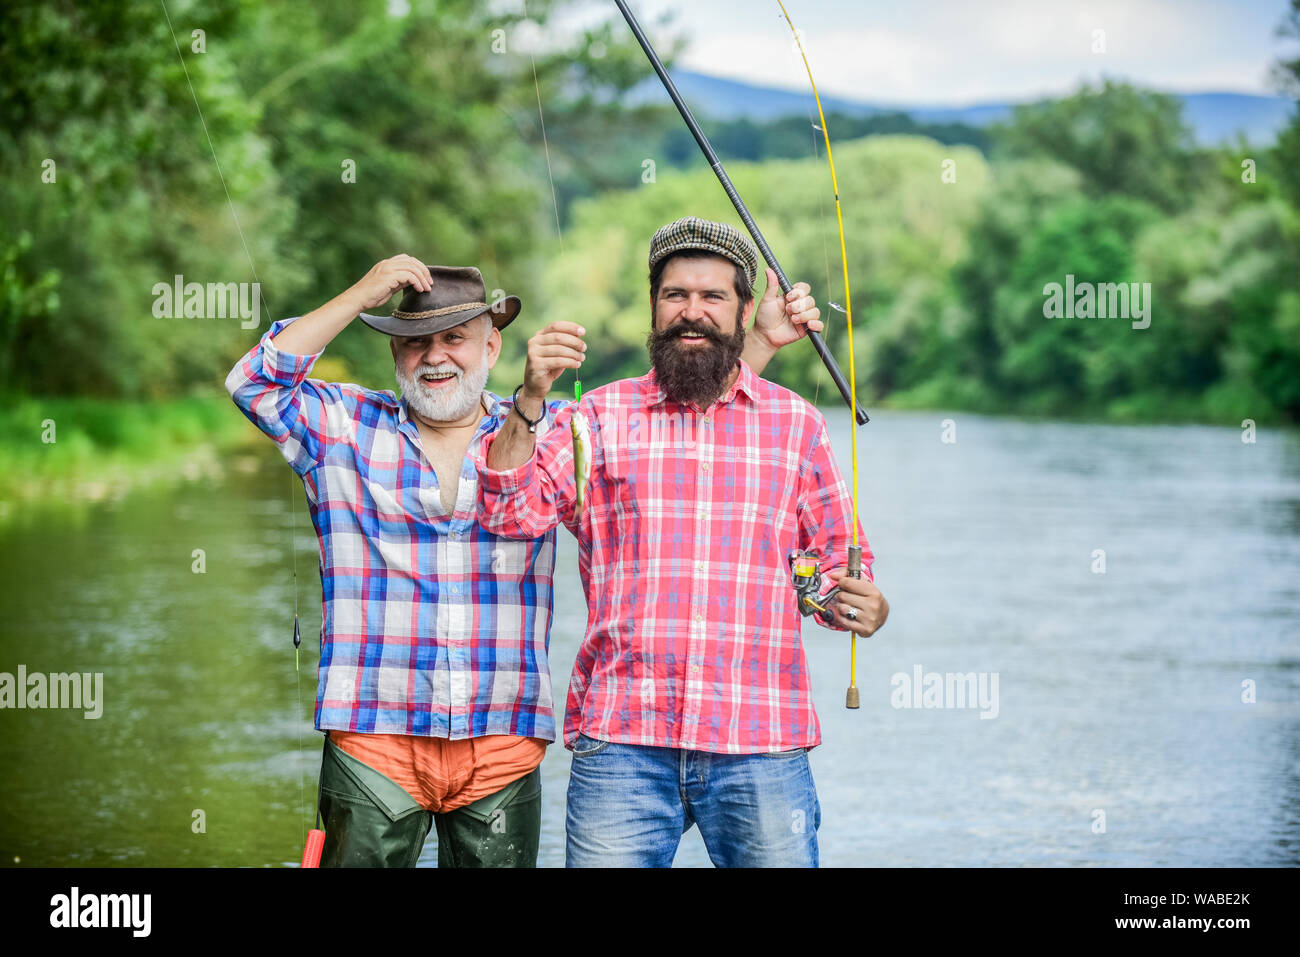 Fisherman with fishing rod. Activity and hobby. Fishing freshwater lake  pond river. Bearded men catching fish. Mature man with friend fishing.  Summer vacation. Happy cheerful people. Family time Stock Photo - Alamy